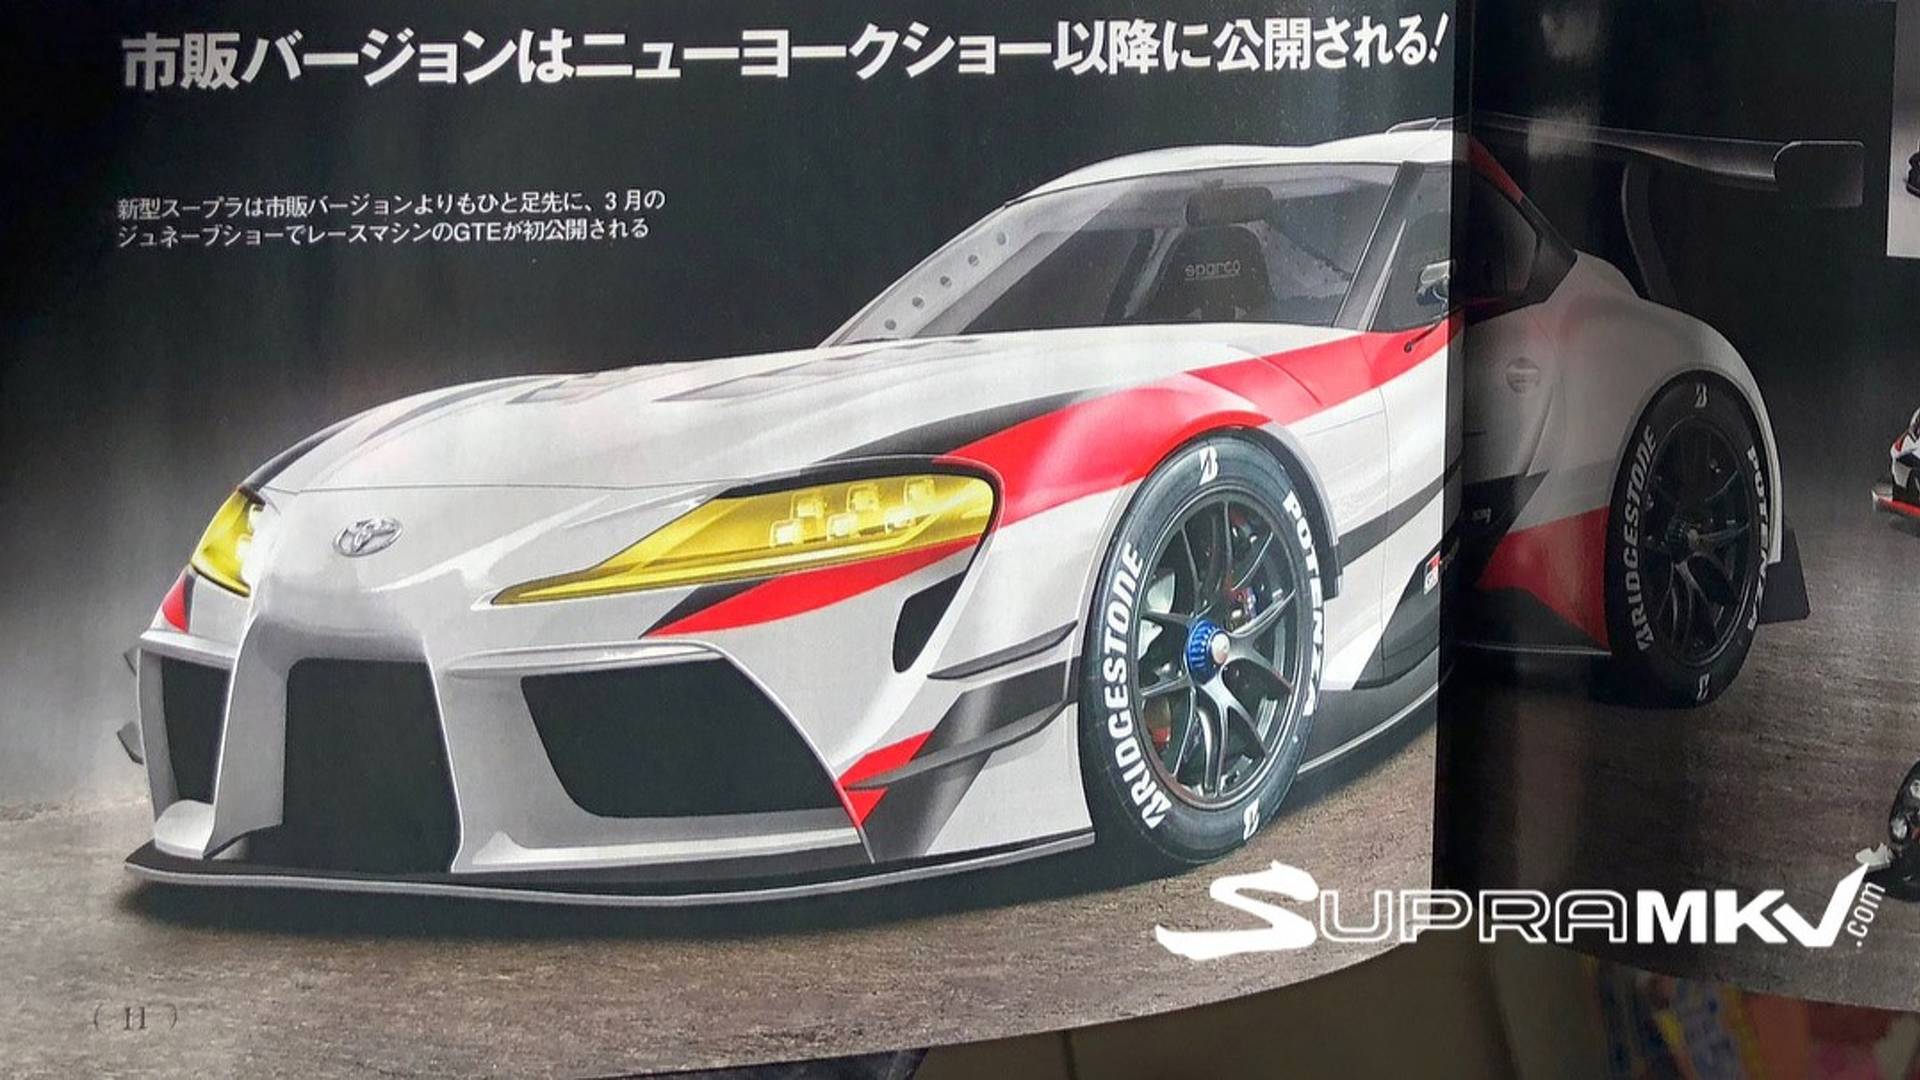 New Toyota Supra Leaked In A Japanese Magazine?